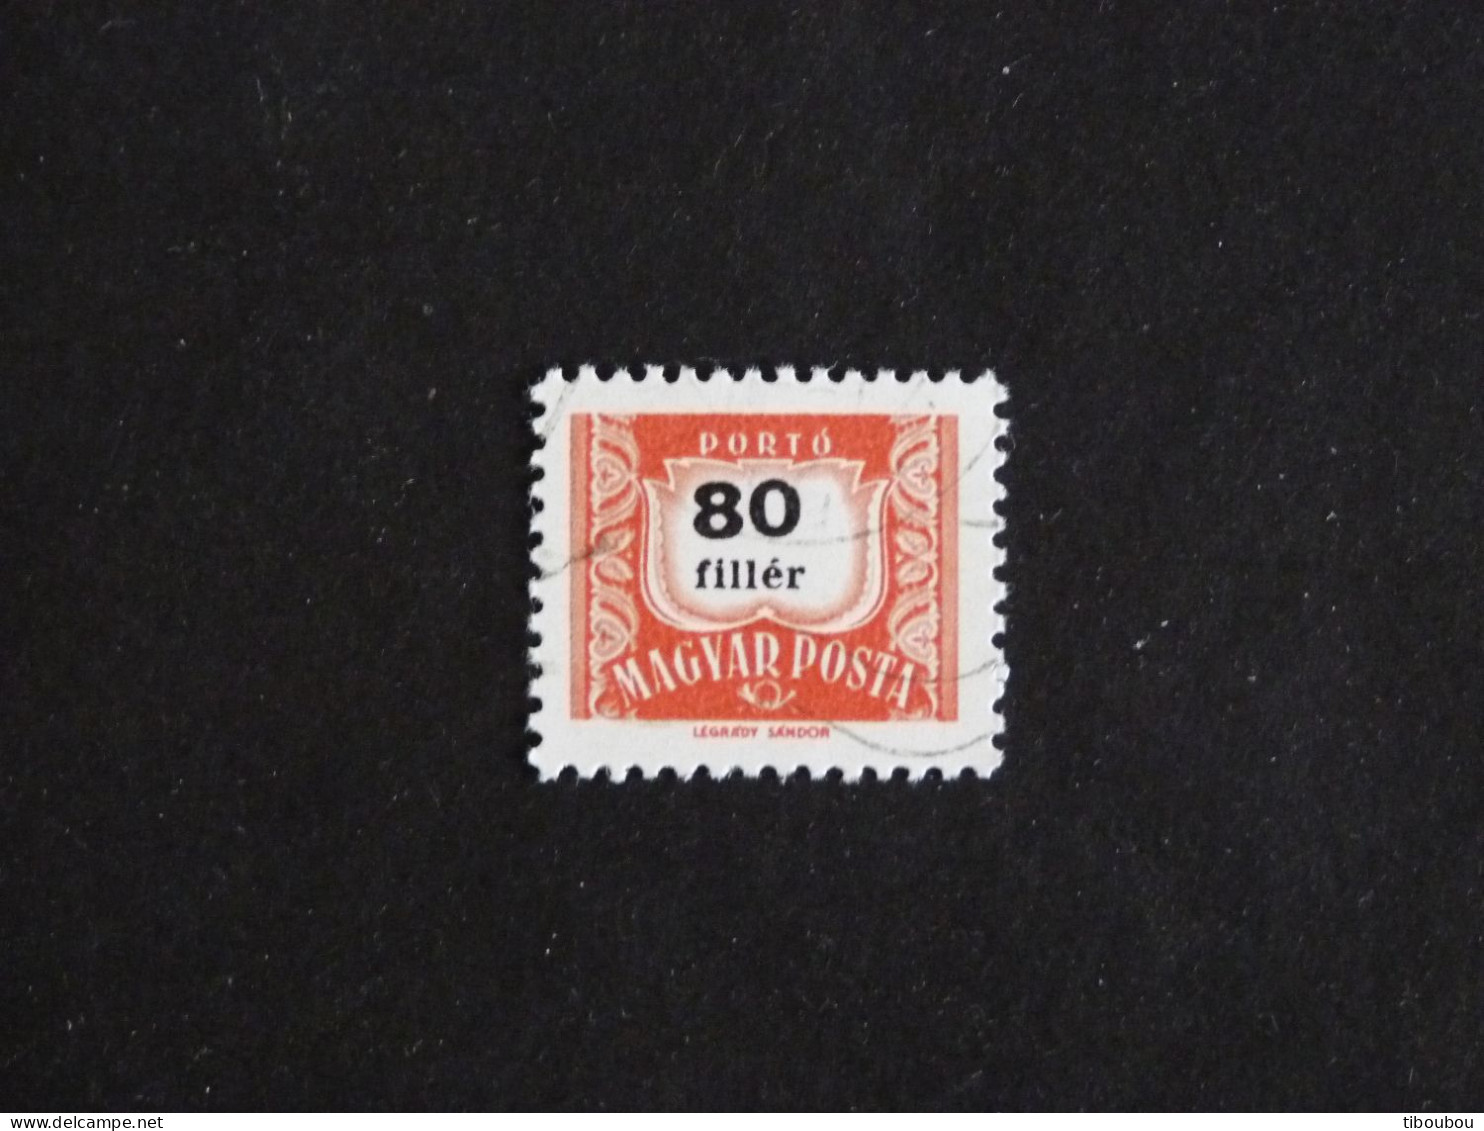 HONGRIE HUNGARY MAGYAR YT TAXE 231B OBLITERE - Postage Due